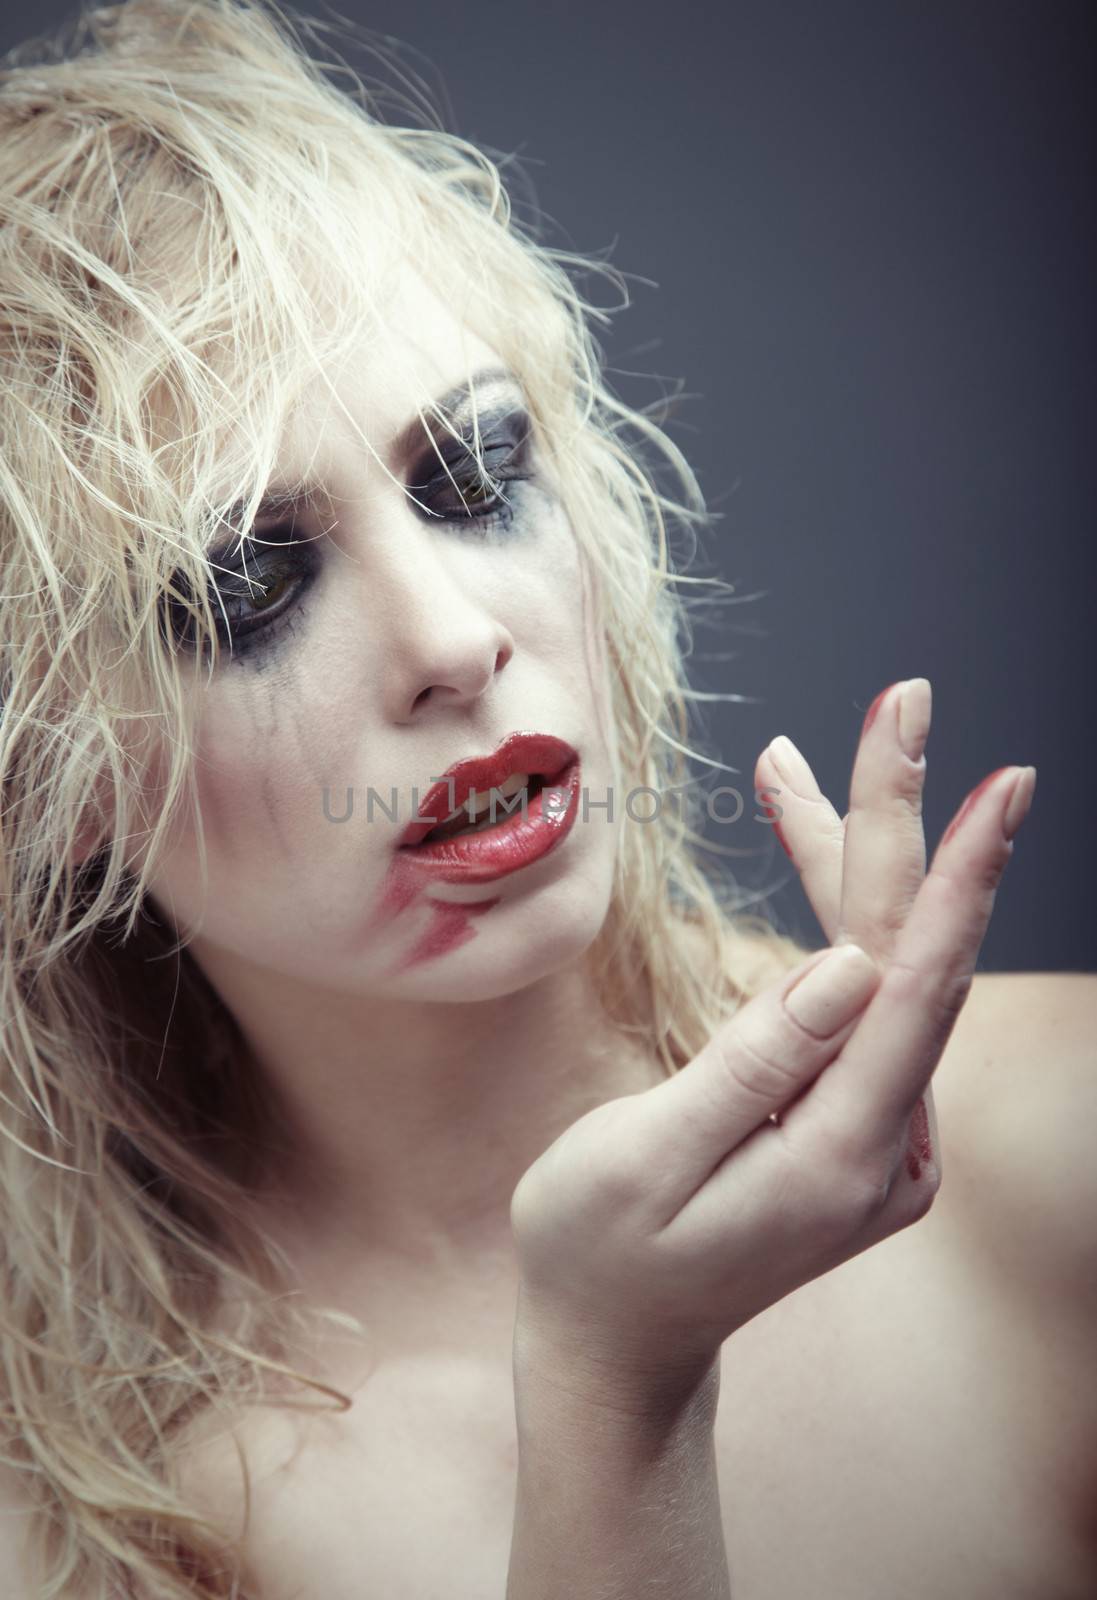 Crazy blond lady with bizarre dirty makeup on a dark background